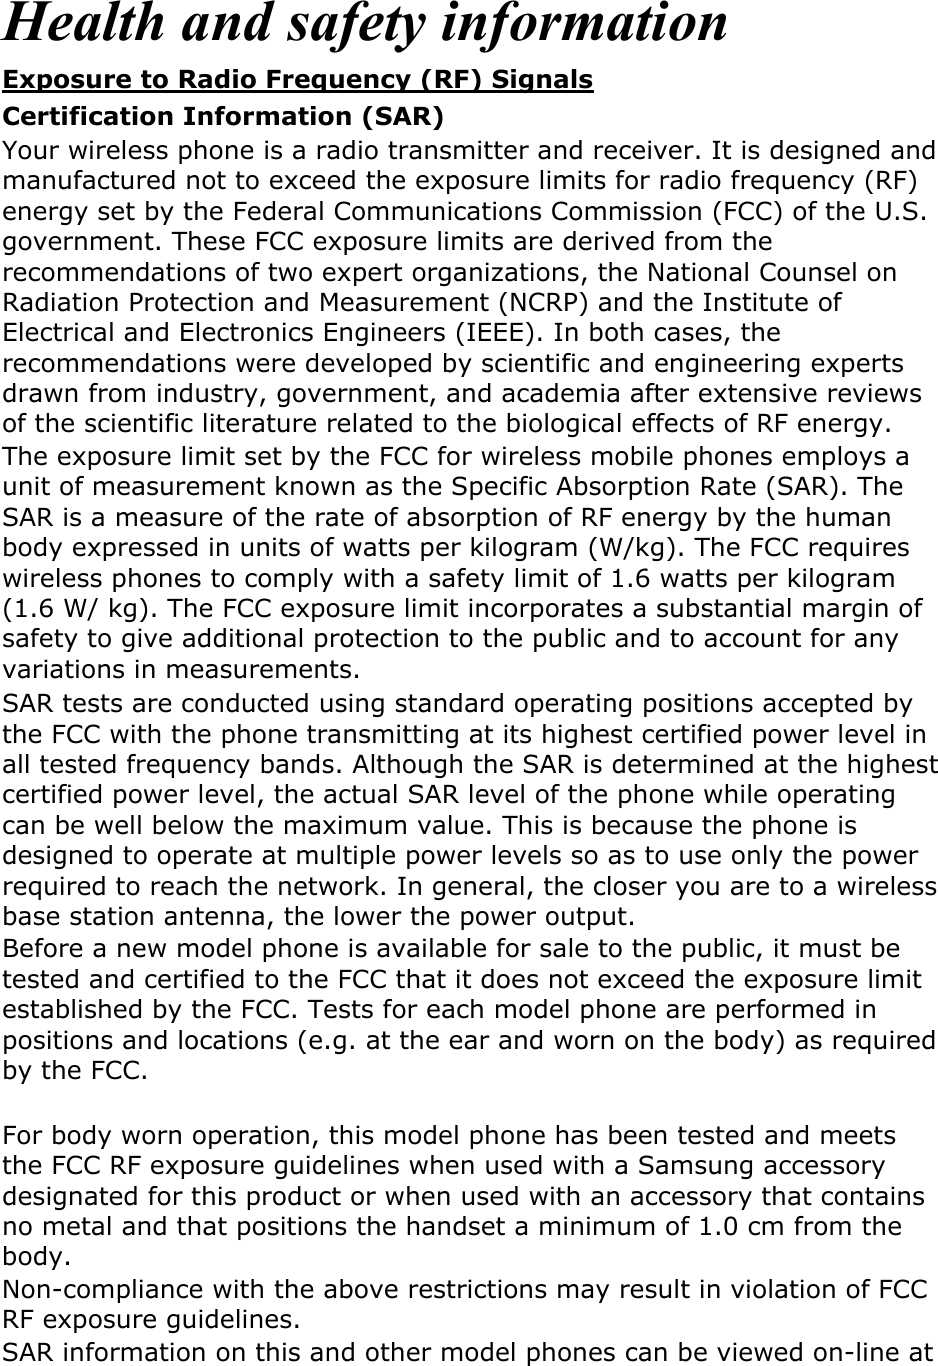  Health and safety information Exposure to Radio Frequency (RF) Signals Certification Information (SAR) Your wireless phone is a radio transmitter and receiver. It is designed and manufactured not to exceed the exposure limits for radio frequency (RF) energy set by the Federal Communications Commission (FCC) of the U.S. government. These FCC exposure limits are derived from the recommendations of two expert organizations, the National Counsel on Radiation Protection and Measurement (NCRP) and the Institute of Electrical and Electronics Engineers (IEEE). In both cases, the recommendations were developed by scientific and engineering experts drawn from industry, government, and academia after extensive reviews of the scientific literature related to the biological effects of RF energy. The exposure limit set by the FCC for wireless mobile phones employs a unit of measurement known as the Specific Absorption Rate (SAR). The SAR is a measure of the rate of absorption of RF energy by the human body expressed in units of watts per kilogram (W/kg). The FCC requires wireless phones to comply with a safety limit of 1.6 watts per kilogram (1.6 W/ kg). The FCC exposure limit incorporates a substantial margin of safety to give additional protection to the public and to account for any variations in measurements. SAR tests are conducted using standard operating positions accepted by the FCC with the phone transmitting at its highest certified power level in all tested frequency bands. Although the SAR is determined at the highest certified power level, the actual SAR level of the phone while operating can be well below the maximum value. This is because the phone is designed to operate at multiple power levels so as to use only the power required to reach the network. In general, the closer you are to a wireless base station antenna, the lower the power output. Before a new model phone is available for sale to the public, it must be tested and certified to the FCC that it does not exceed the exposure limit established by the FCC. Tests for each model phone are performed in positions and locations (e.g. at the ear and worn on the body) as required by the FCC.      For body worn operation, this model phone has been tested and meets the FCC RF exposure guidelines when used with a Samsung accessory designated for this product or when used with an accessory that contains no metal and that positions the handset a minimum of 1.0 cm from the body.   Non-compliance with the above restrictions may result in violation of FCC RF exposure guidelines. SAR information on this and other model phones can be viewed on-line at 